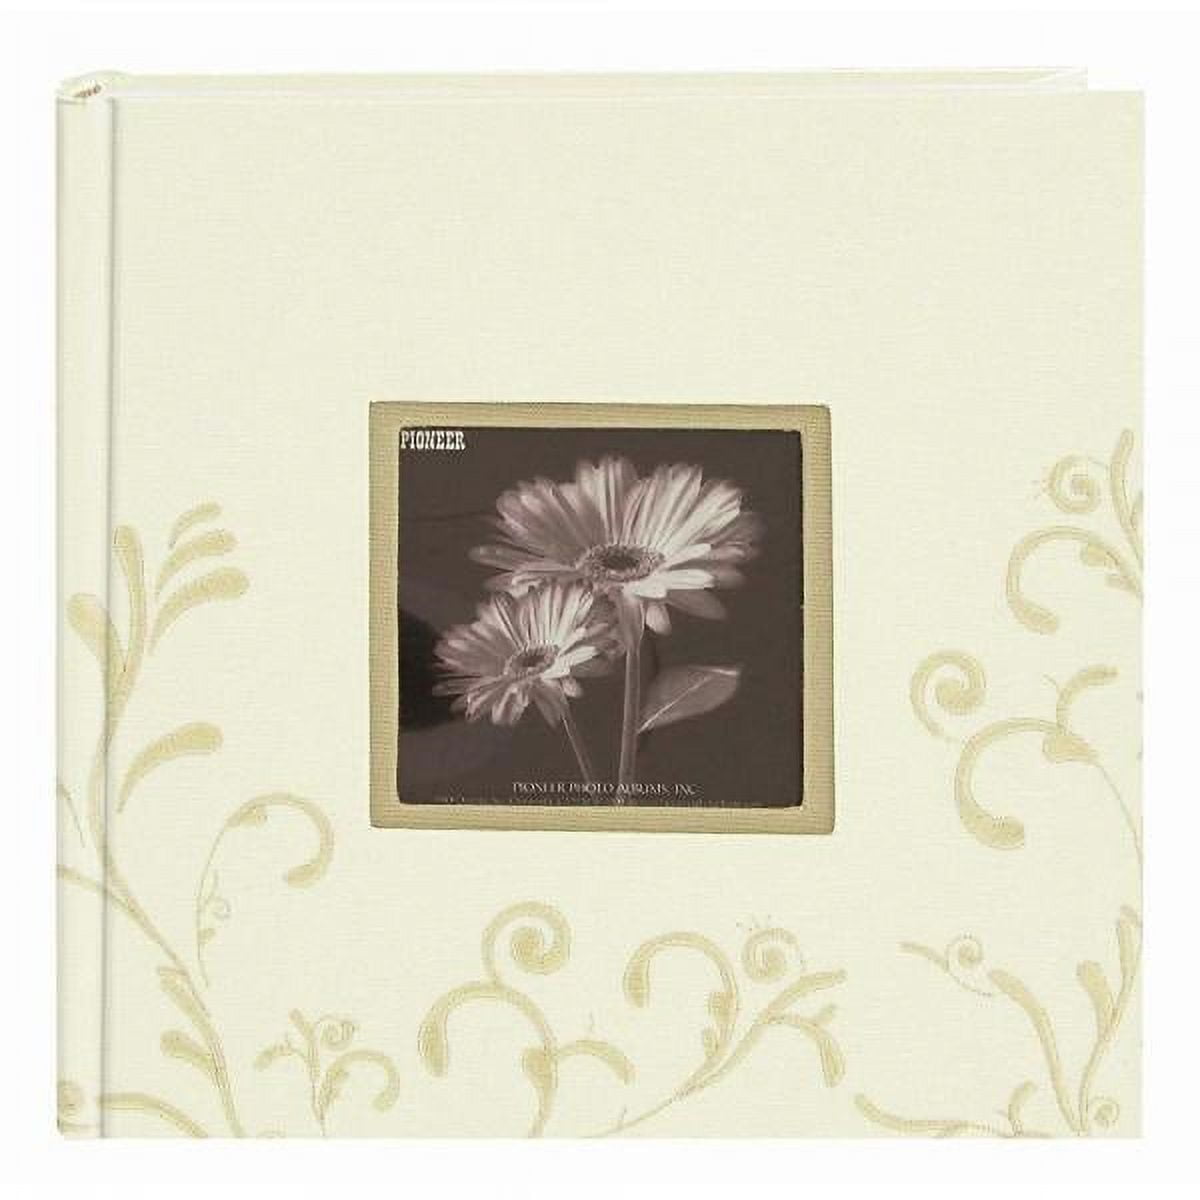 Pioneer Photo Albums High Capacity 500 Pkt 4x6 Sewn Fabric/Leatherette,  Black and Beige 